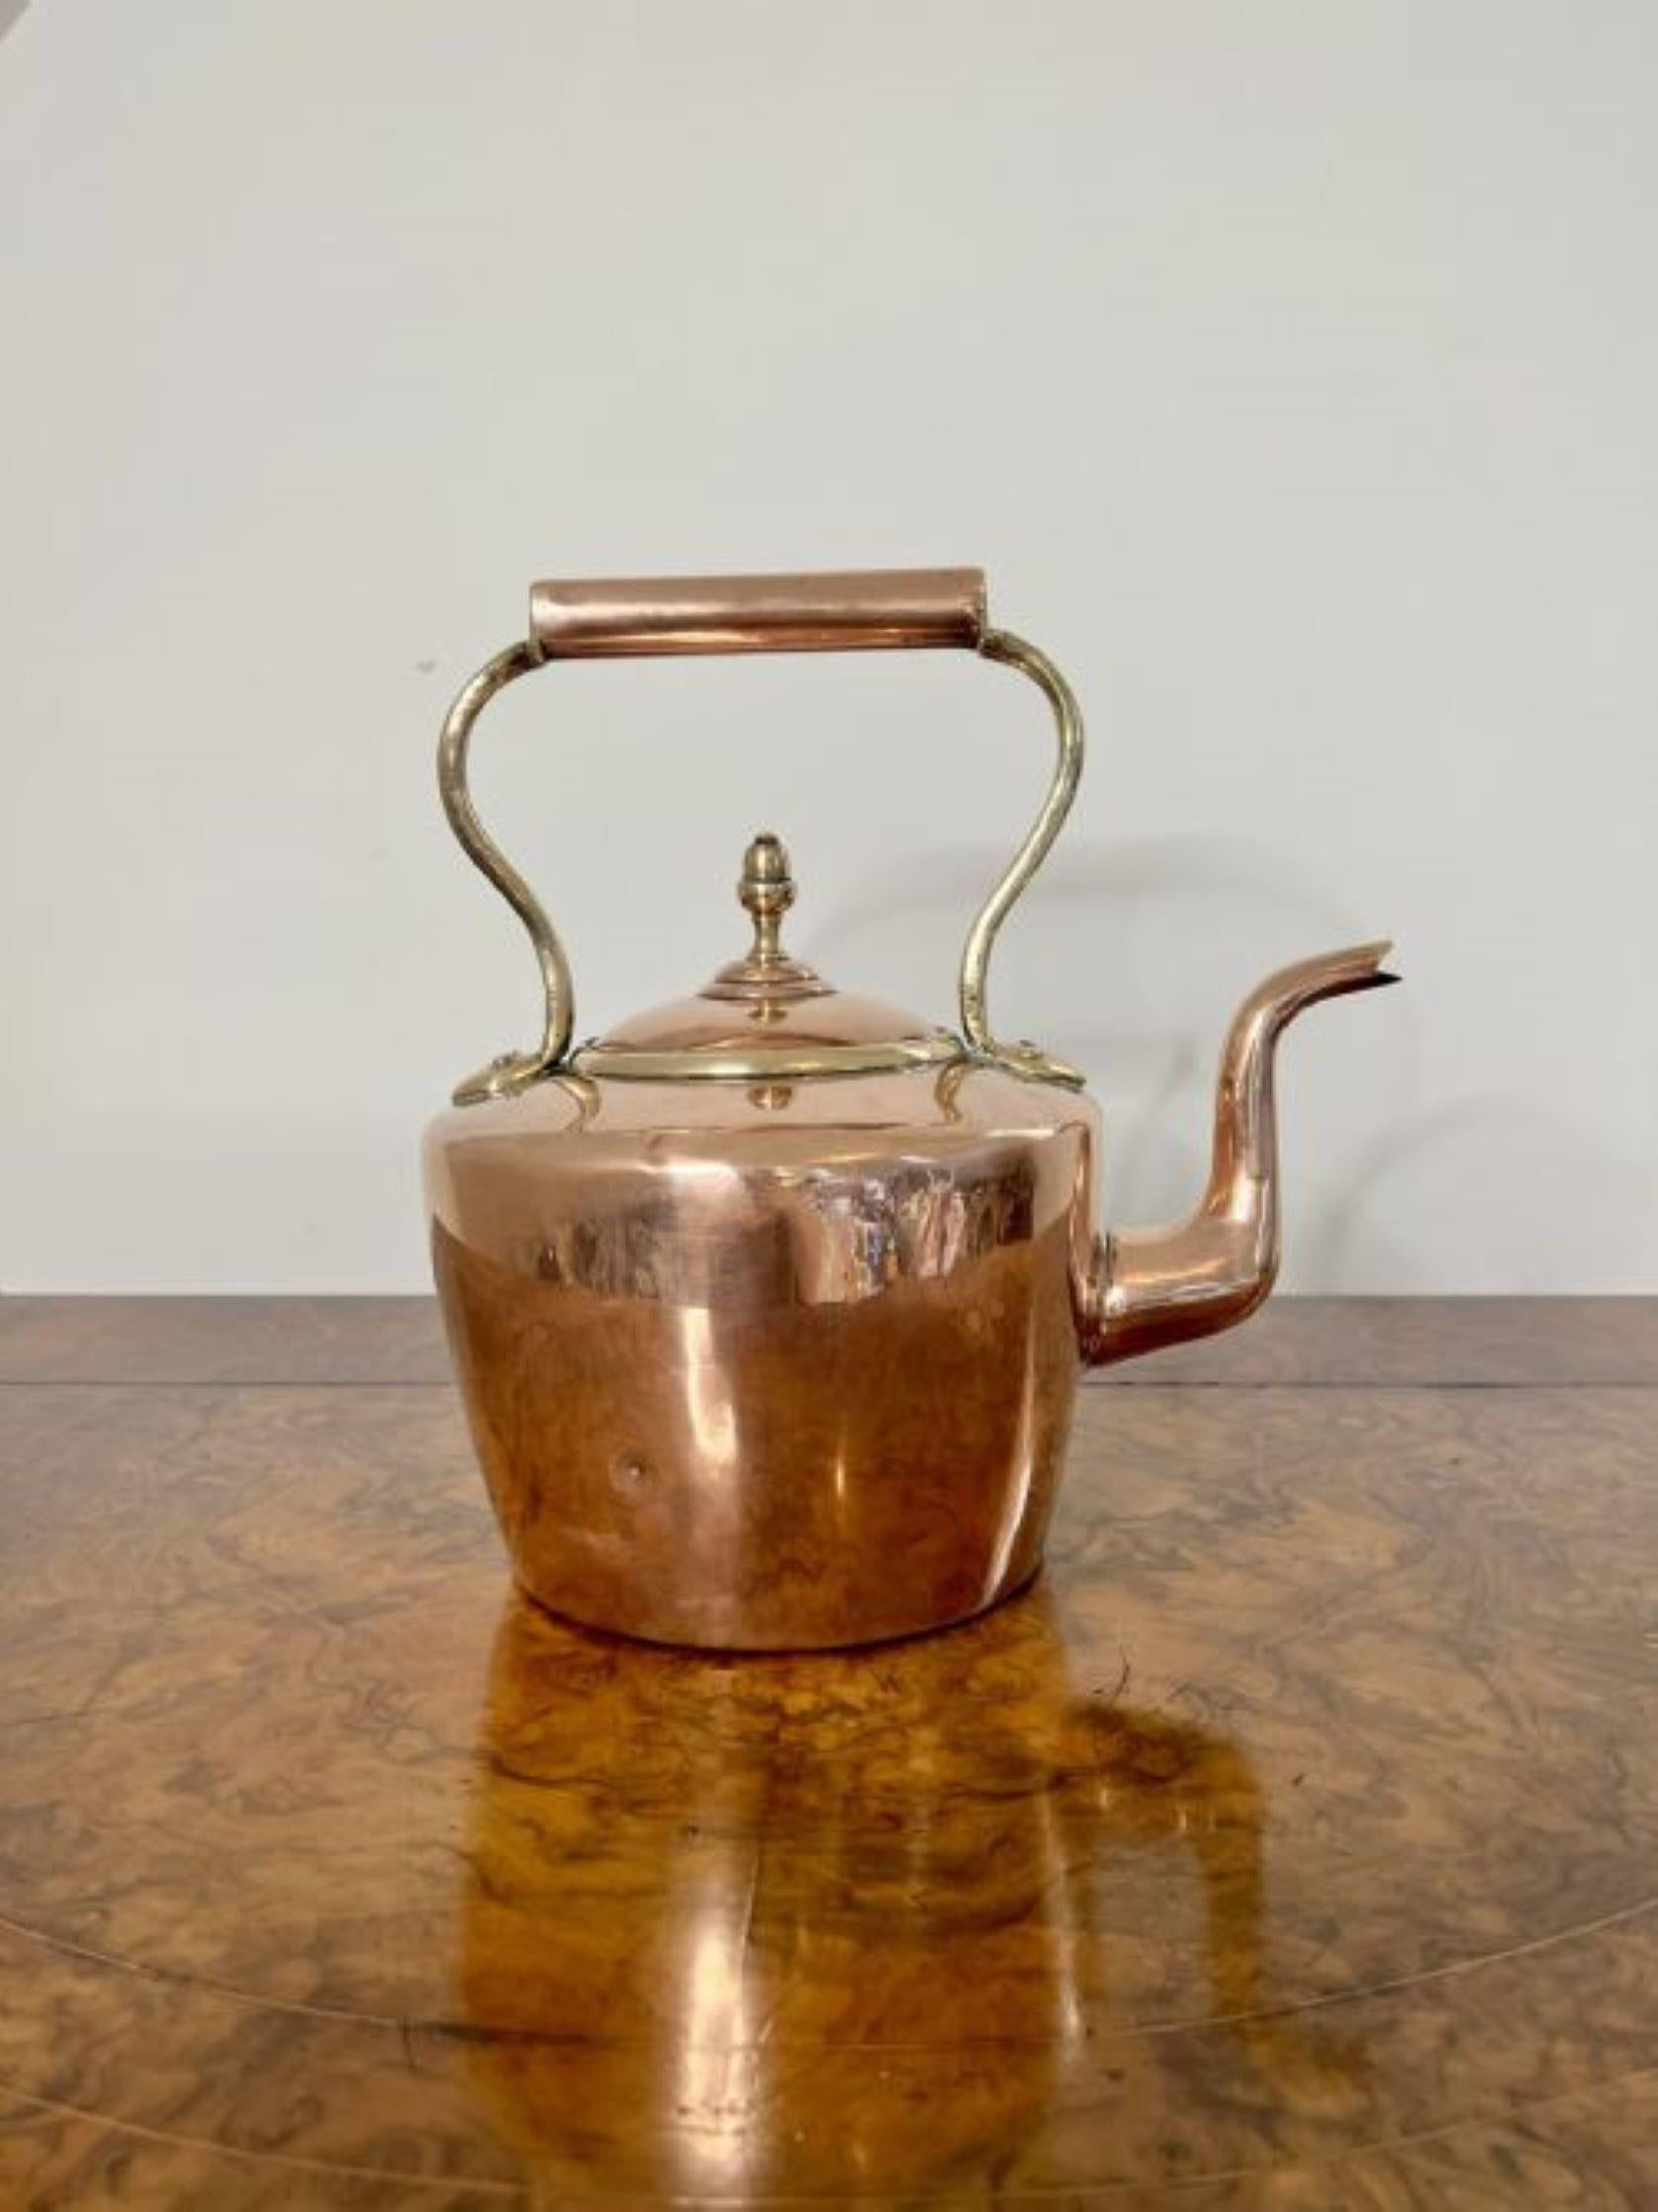 Antique George III quality copper kettle having a quality copper kettle with a removable lid with the original brass knob, having a shaped handle and spout.